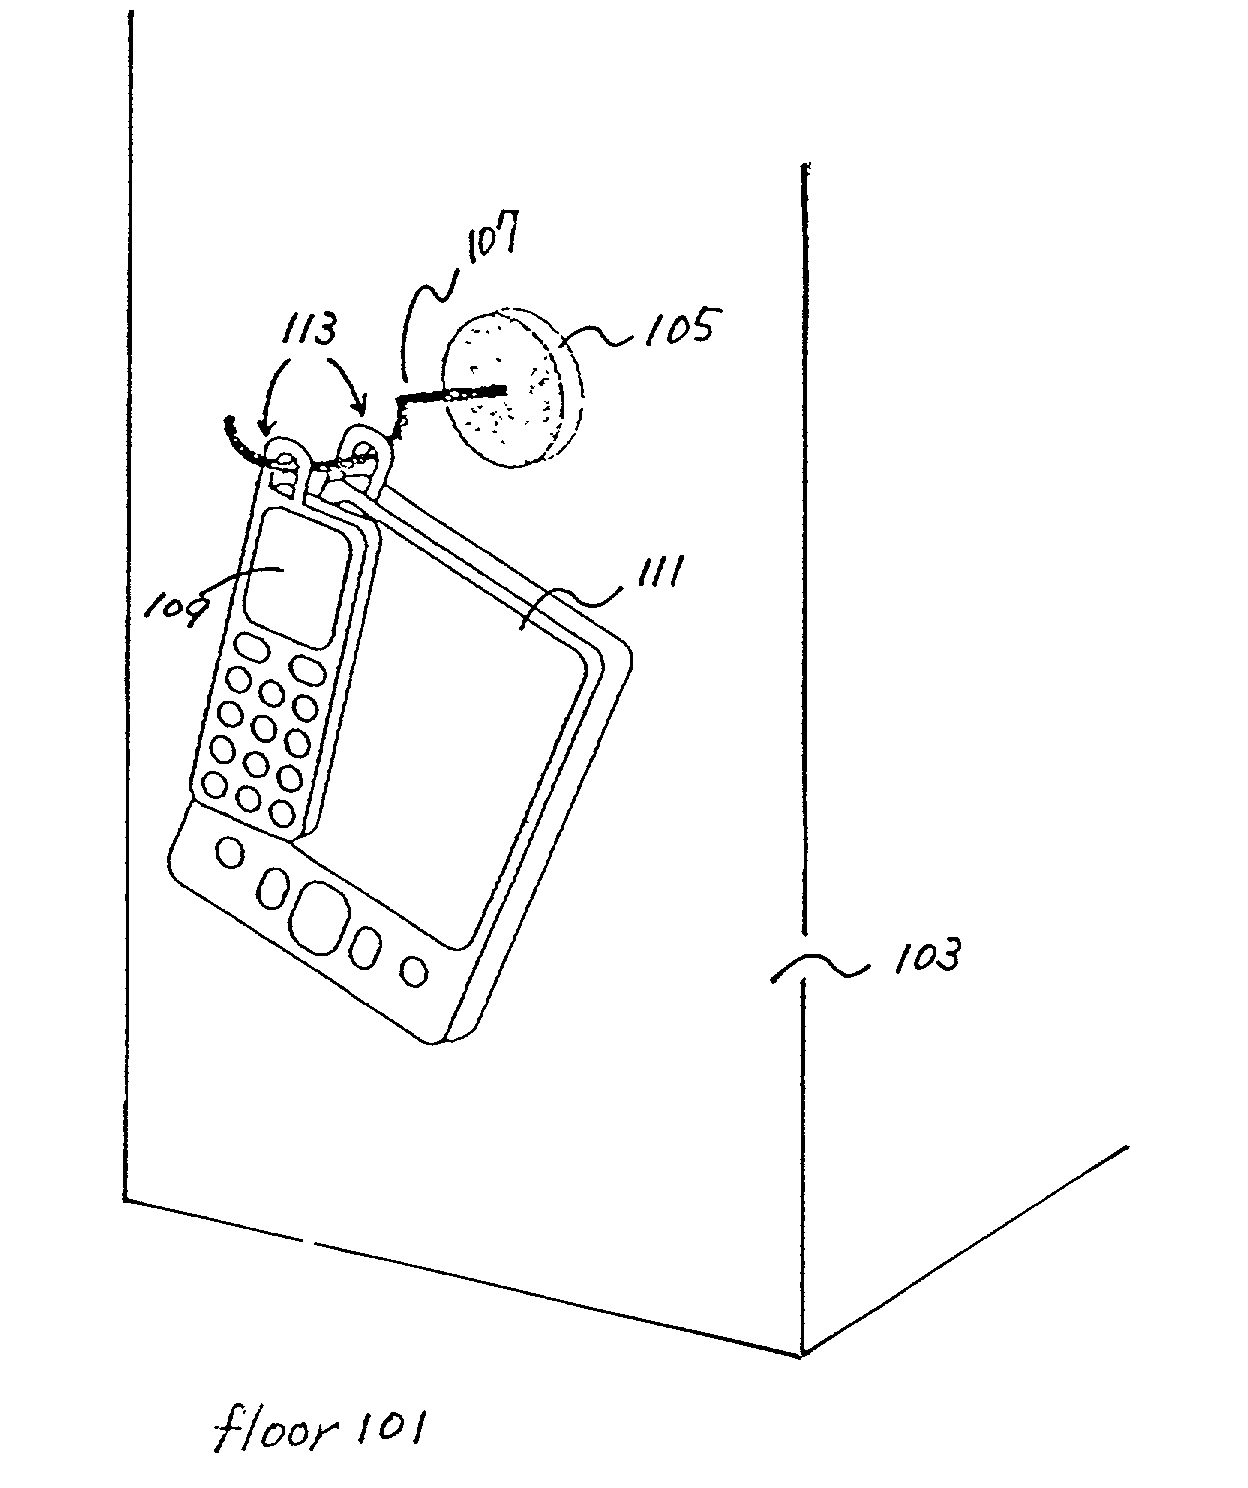 Charging system for portable equipment